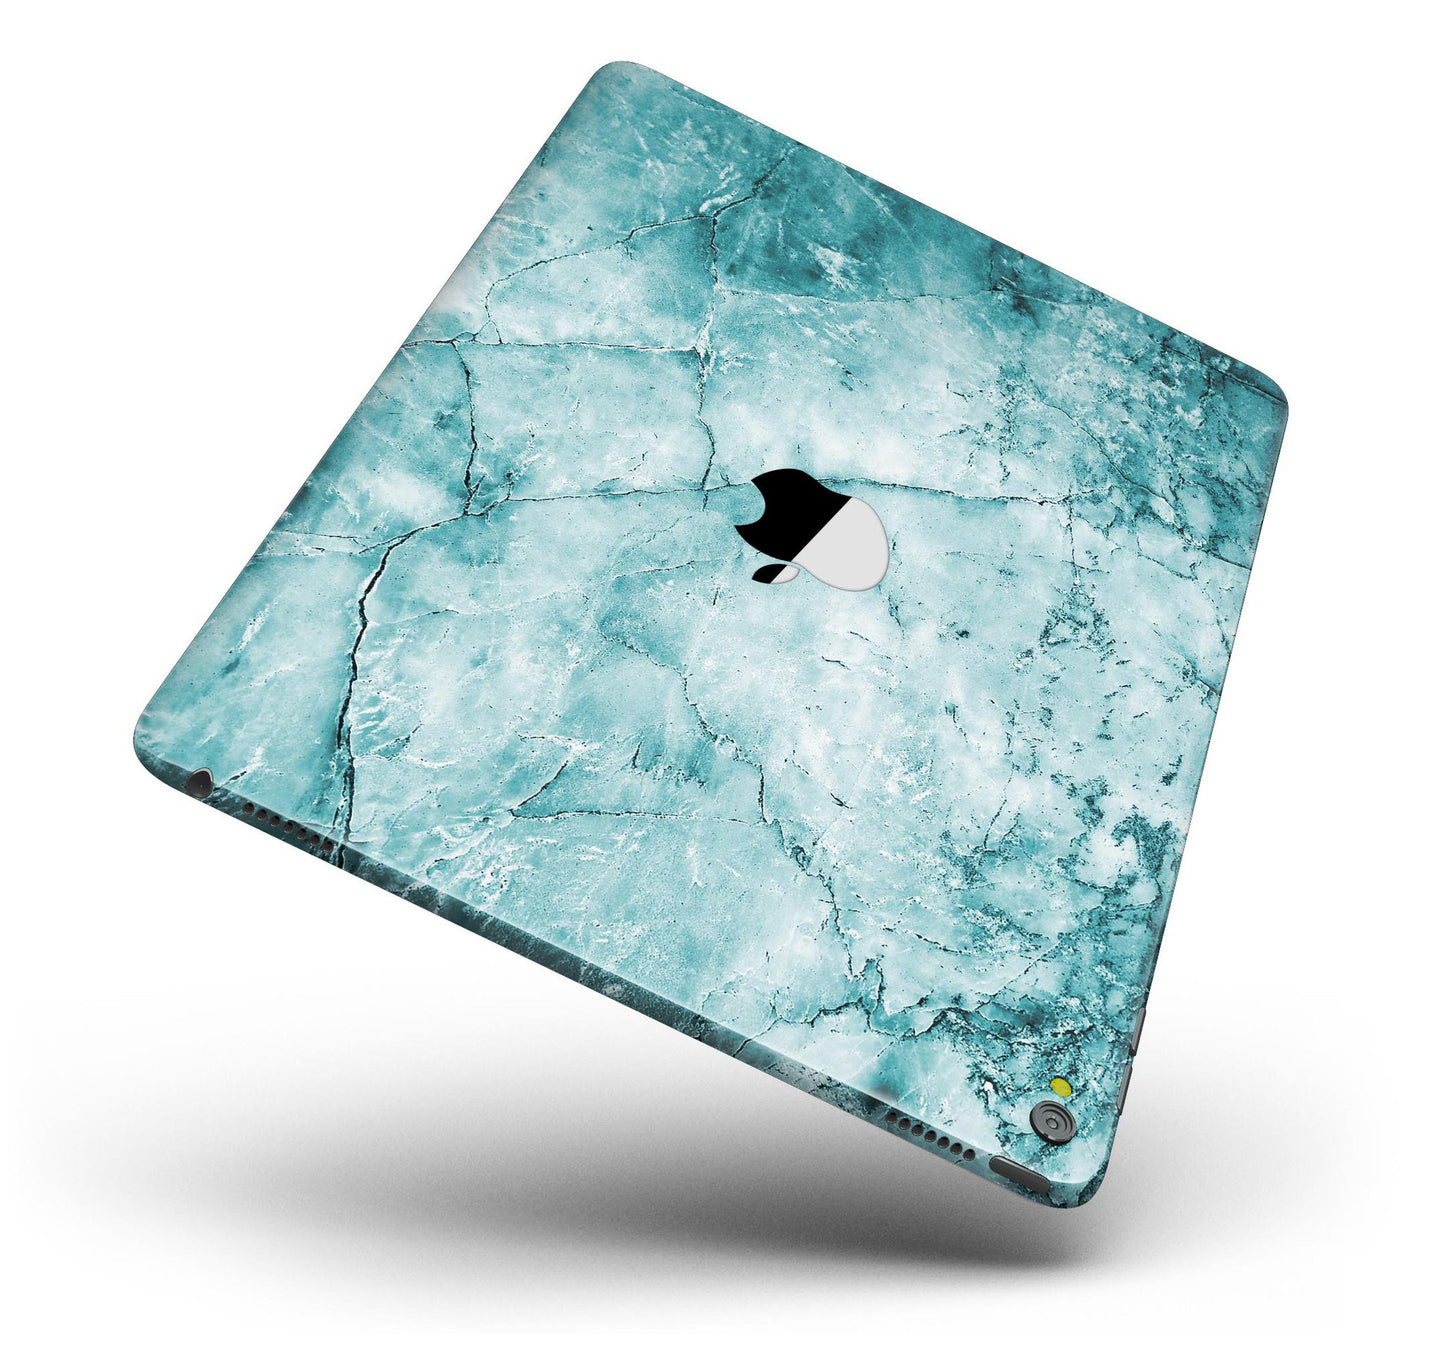 Cracked Turquise Marble Surface Full Body Skin for the iPad Pro (12.9"